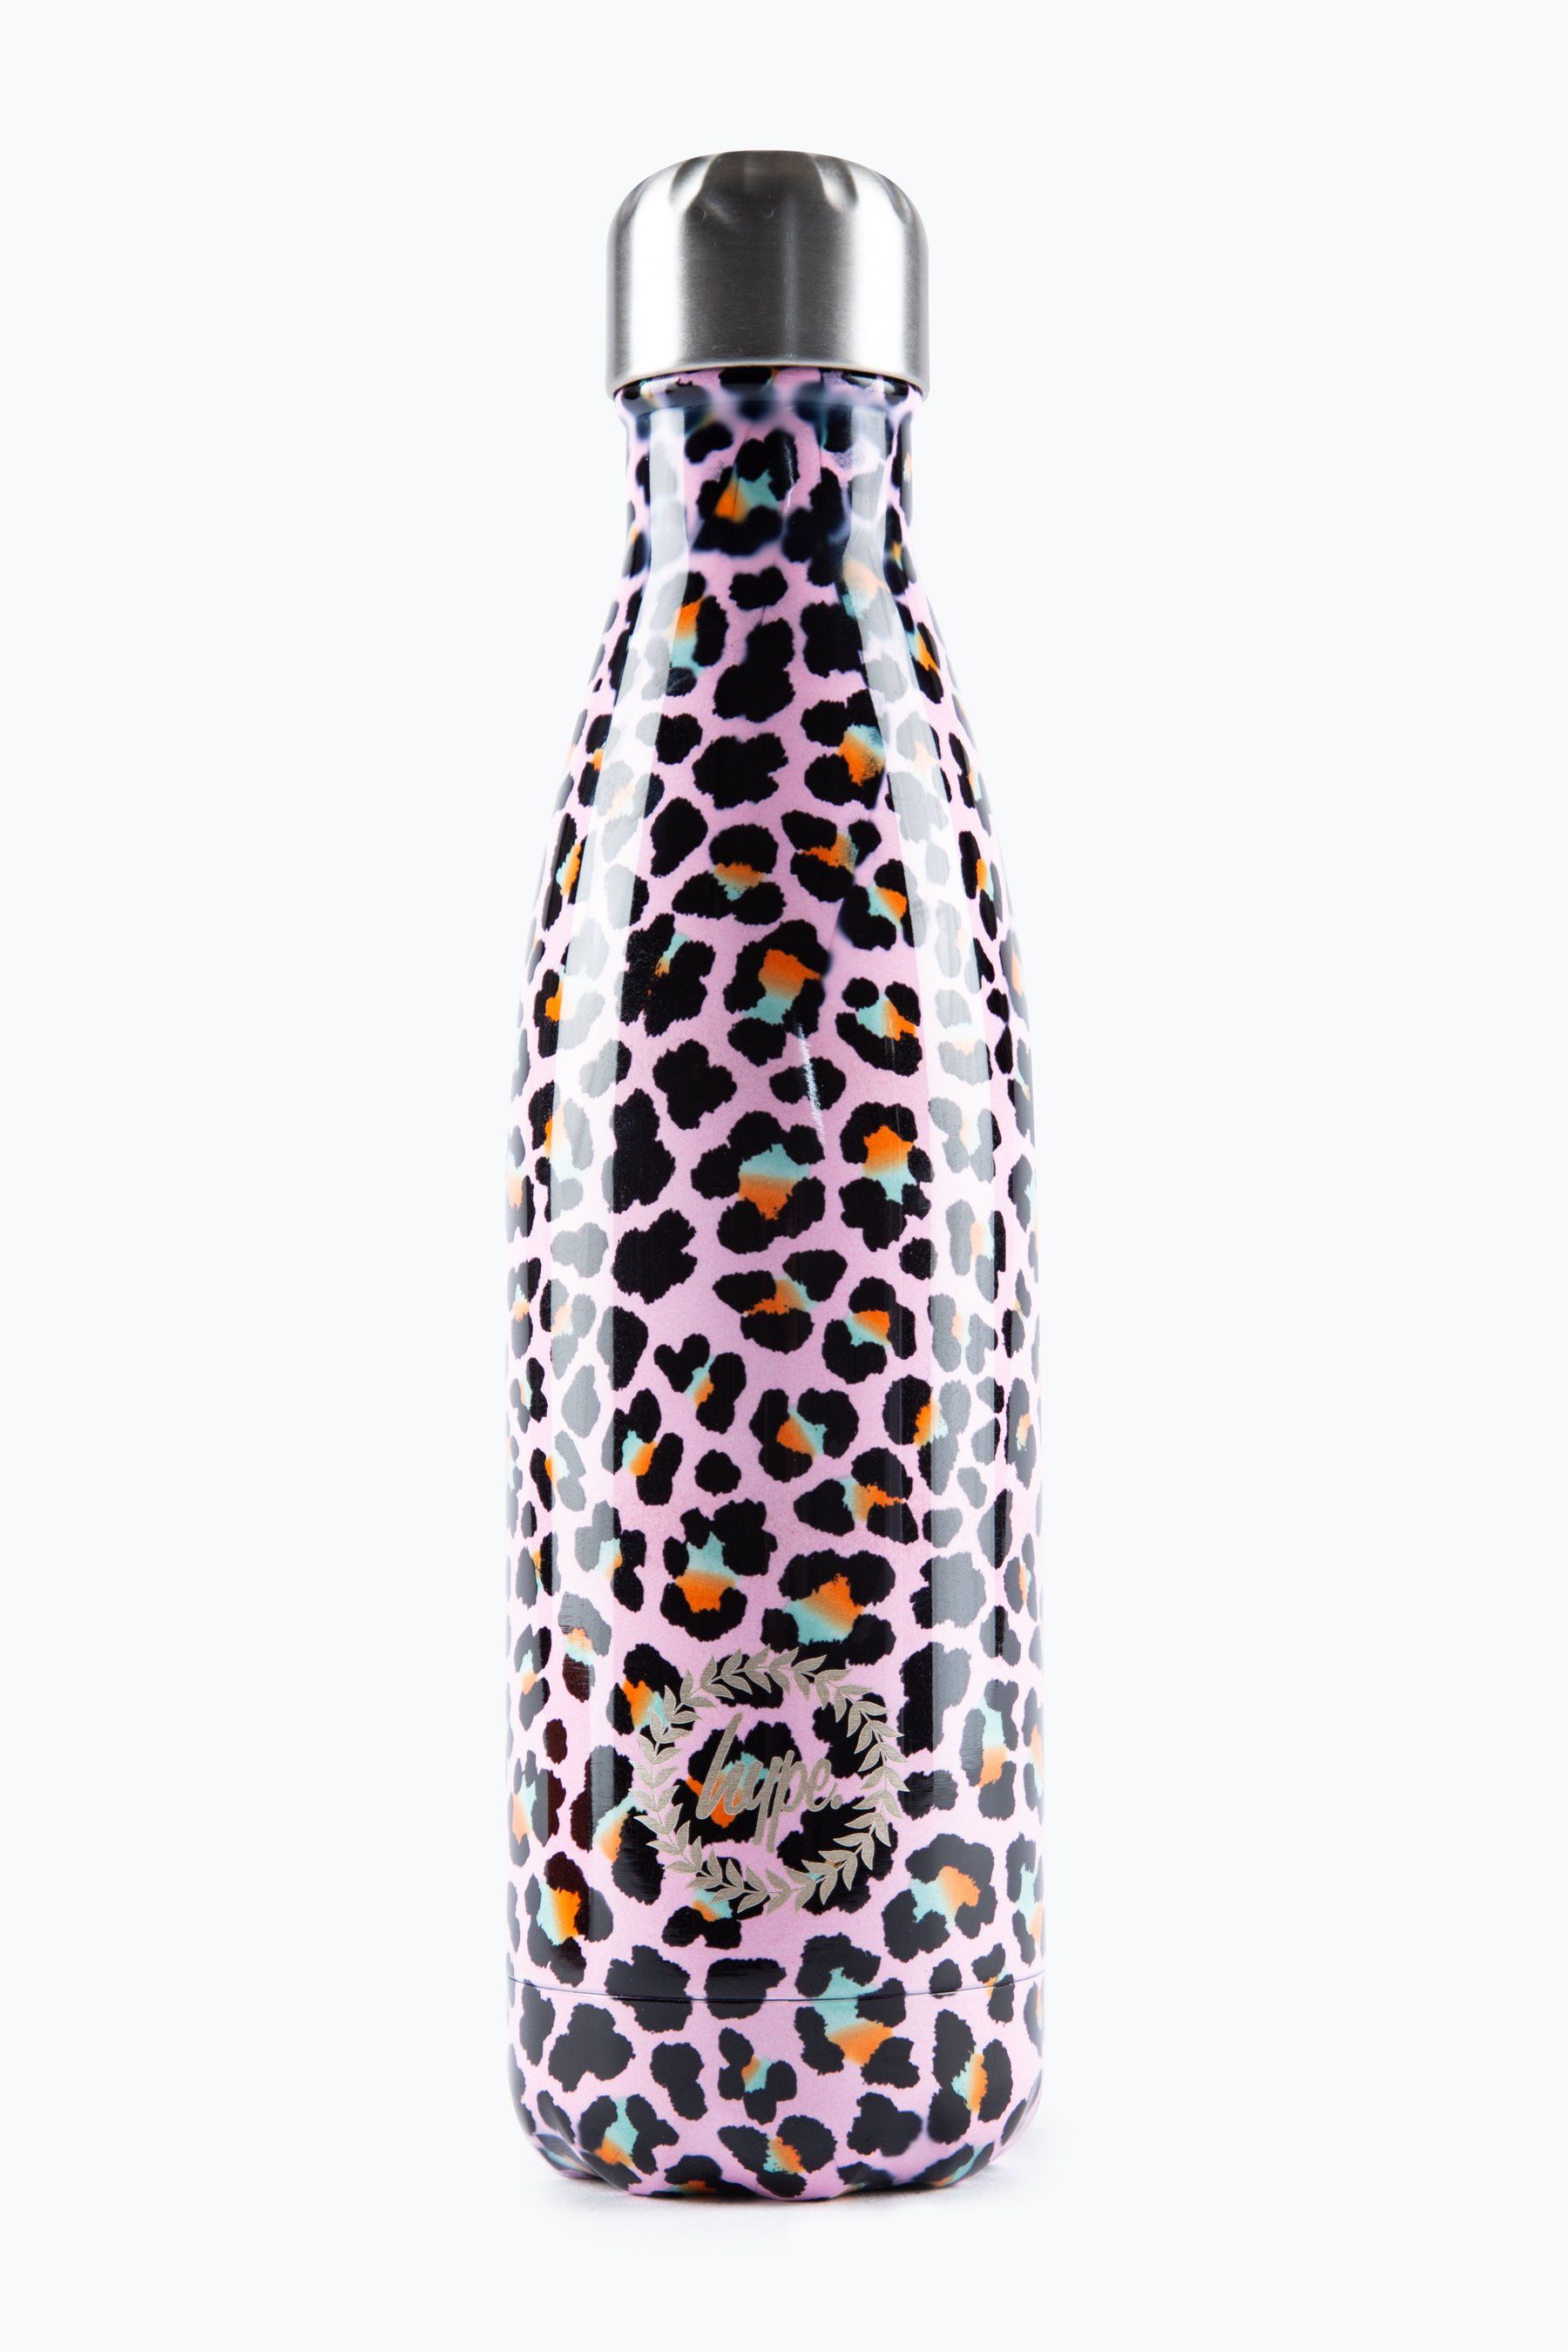 Keeping you hydrated, in style. Meet the HYPE. Disco Leopard Reusable Water Bottle, perfect for when you're on the go. Designed in Aluminium to ensure your water stays ice-cold and for chillier days, keeping your oat milk latte warm for longer. Reuse it again and again with an airtight screw lid prevents spills. Designed in an all-over leopard inspired print in a pink, orange and mint colour palette. Why not grab one of our lunch bags or backpacks with a bottle holder to complete the look. Hand wash only.